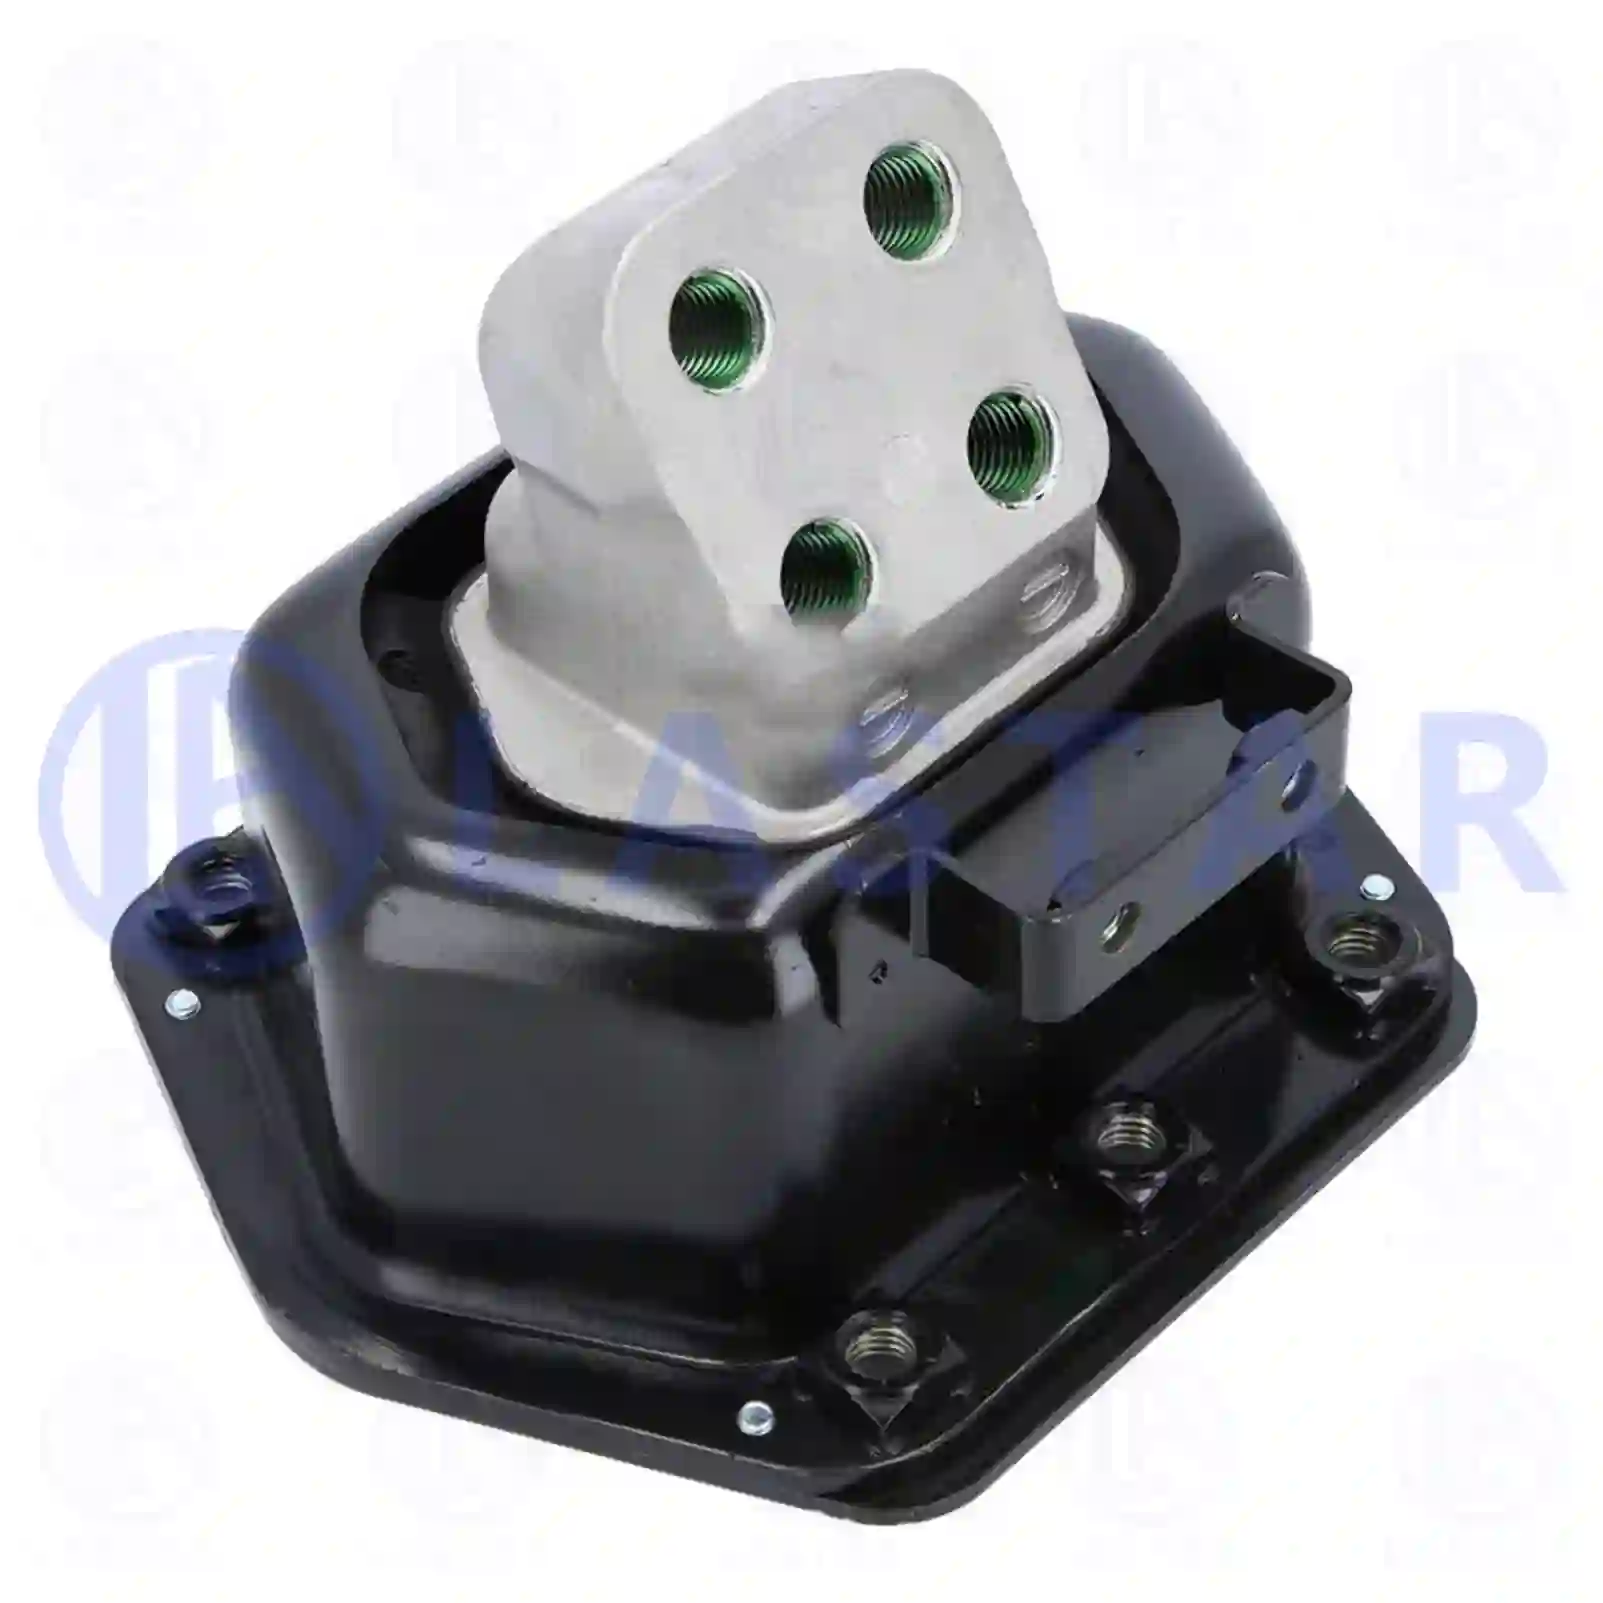 Engine mounting, 77702971, 1806722 ||  77702971 Lastar Spare Part | Truck Spare Parts, Auotomotive Spare Parts Engine mounting, 77702971, 1806722 ||  77702971 Lastar Spare Part | Truck Spare Parts, Auotomotive Spare Parts